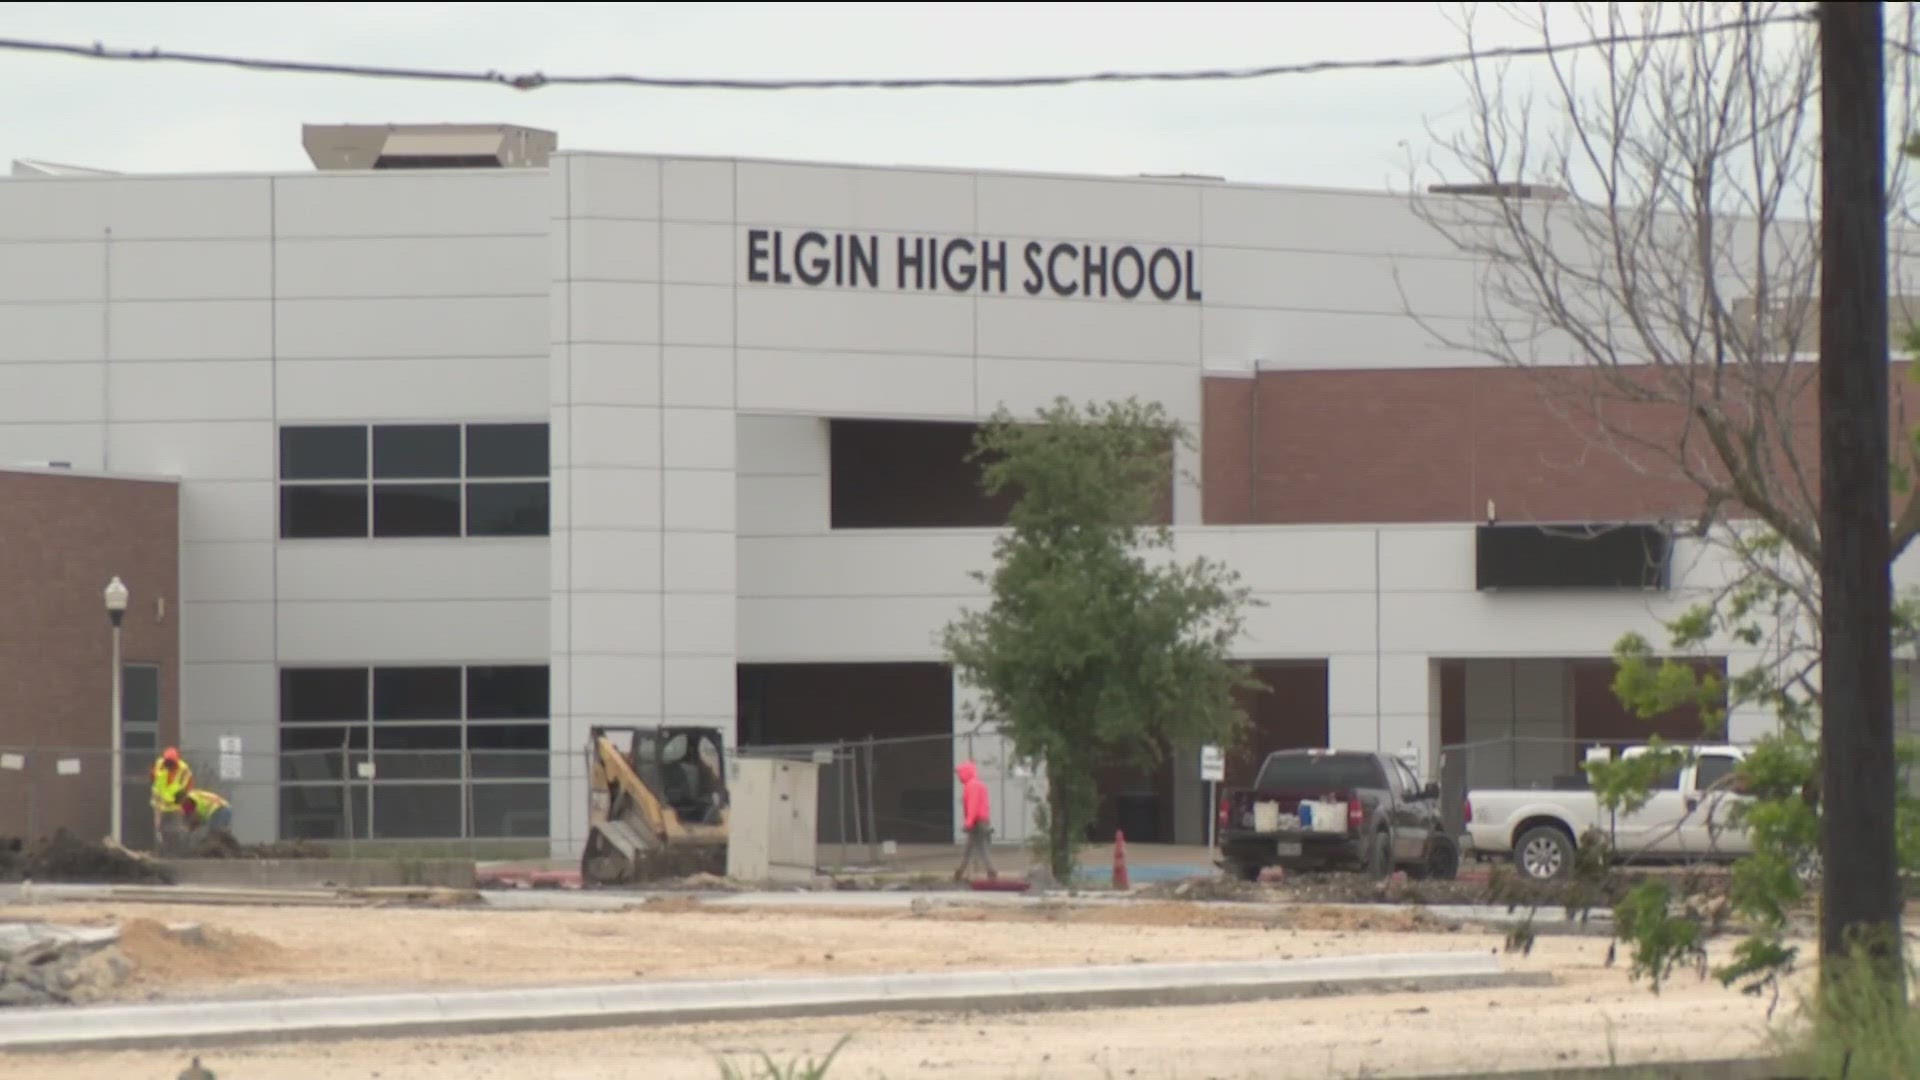 To prepare for the future, Elgin ISD is asking voters to approve a $375 million bond package to address the area's rapid growth.